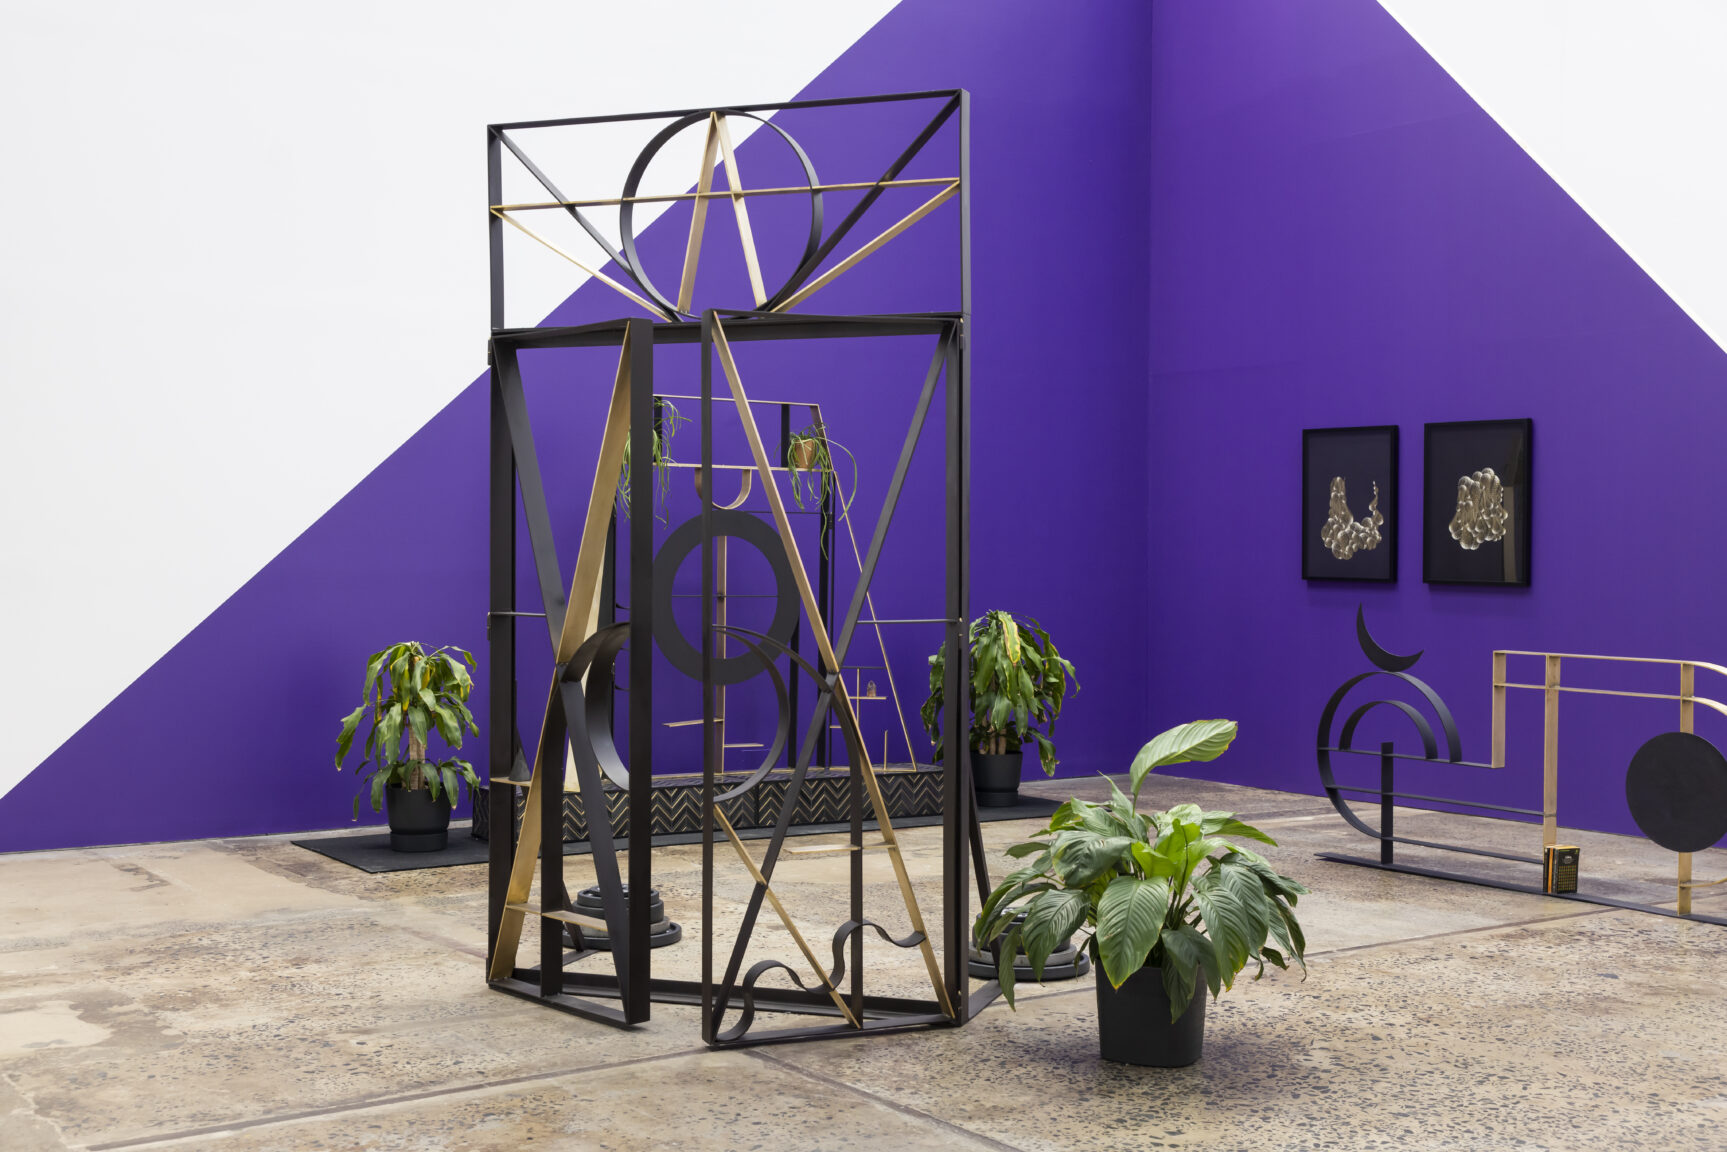 An art installation, inclusive of two wrought-iron like structures, three pot plants and two framed images hanging on a wall that forms a corner with another wall. The wall is painted diagonally in two-tone, white and purple with the purple sections creating a triangular like shape from the corner.